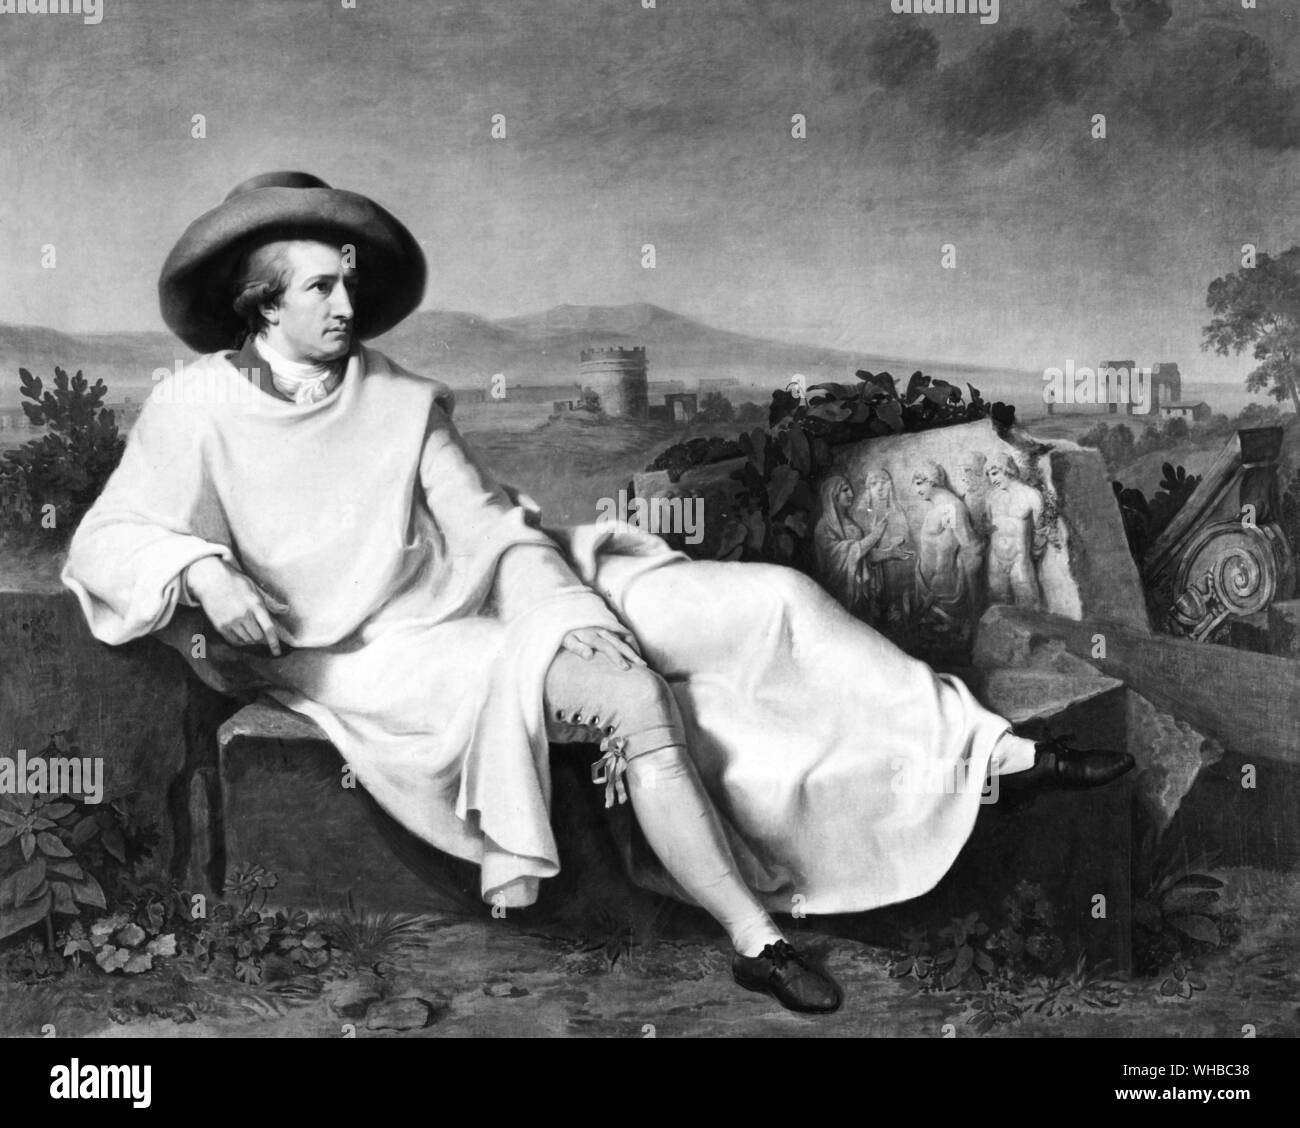 Goethe in the Roman Campagne 1787 by J.H.W. Tischbein - Johann Wolfgang von Goethe (28 August 1749 - 22 March 1832) was a German writer. George Eliot called him Germany's greatest man of letters... and the last true polymath to walk the earth. Goethe's works span the fields of poetry, drama, literature, theology, humanism, science and painting. Goethe's magnum opus, lauded as one of the peaks of world literature, is the two-part dramatic poem Faust. Goethe's other well-known literary works include his numerous poems, the Bildungsroman Wilhelm Meister's Apprenticeship and the epistolary novel Stock Photo